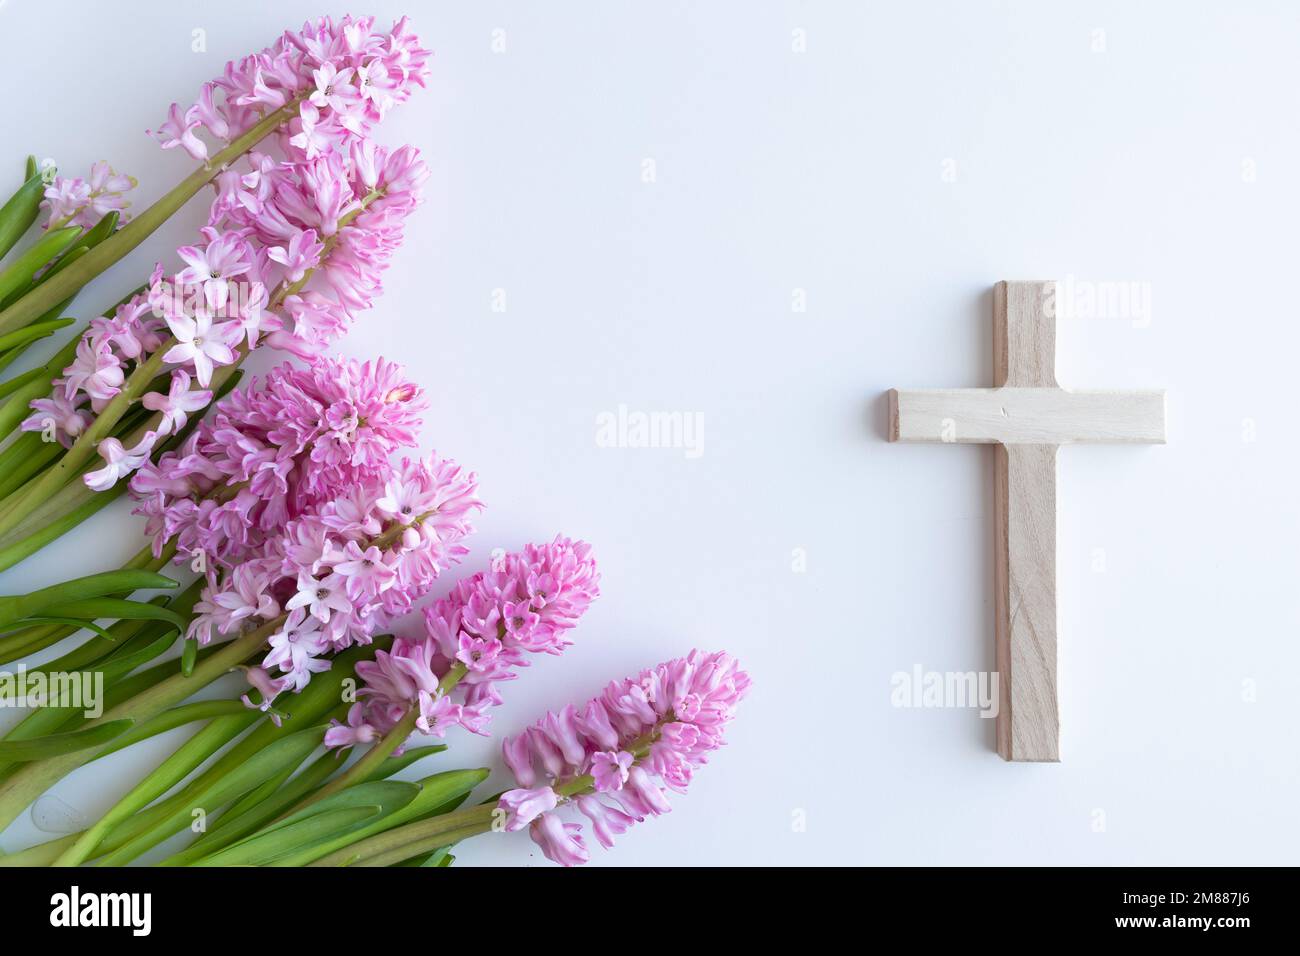 Simple wood Christian cross on a white background with a bouquet of pink hyacinth flowers as a border with copy space Stock Photo